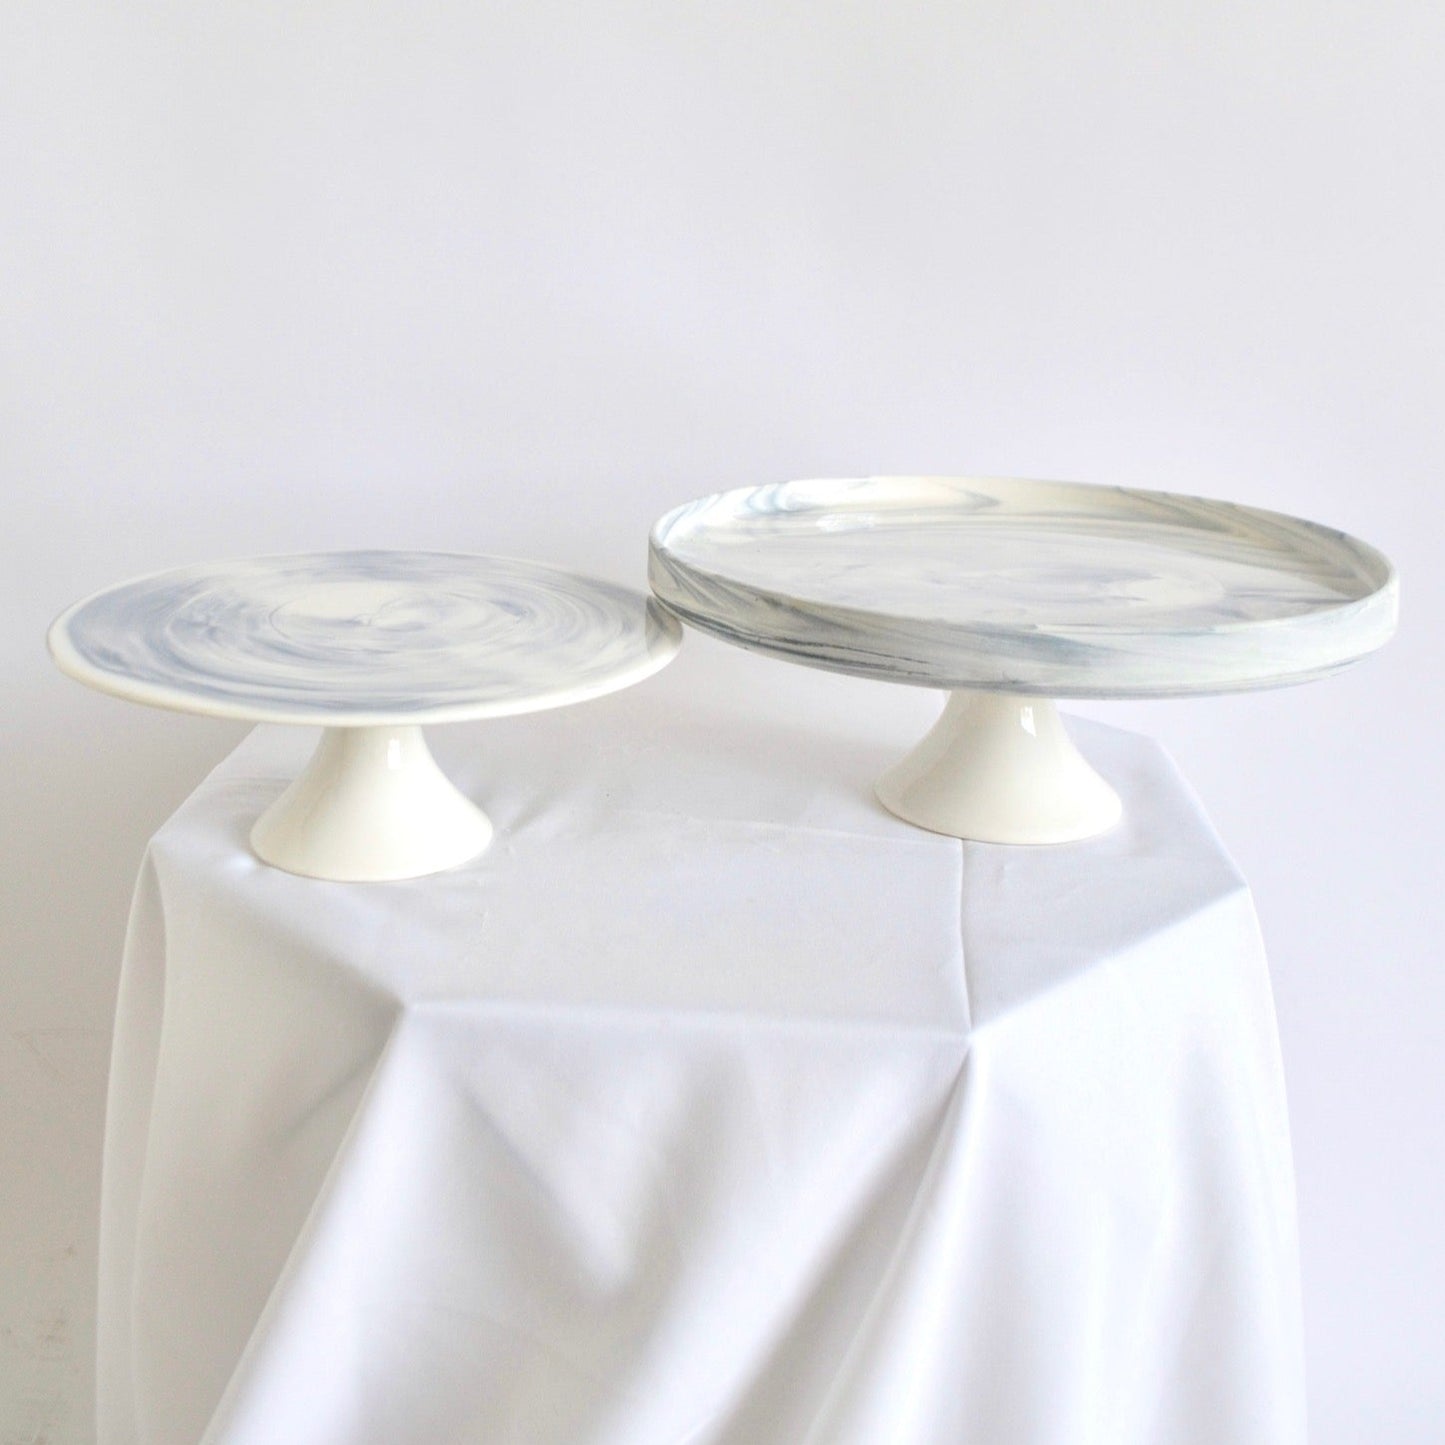 Blue + white marbled round cake stand